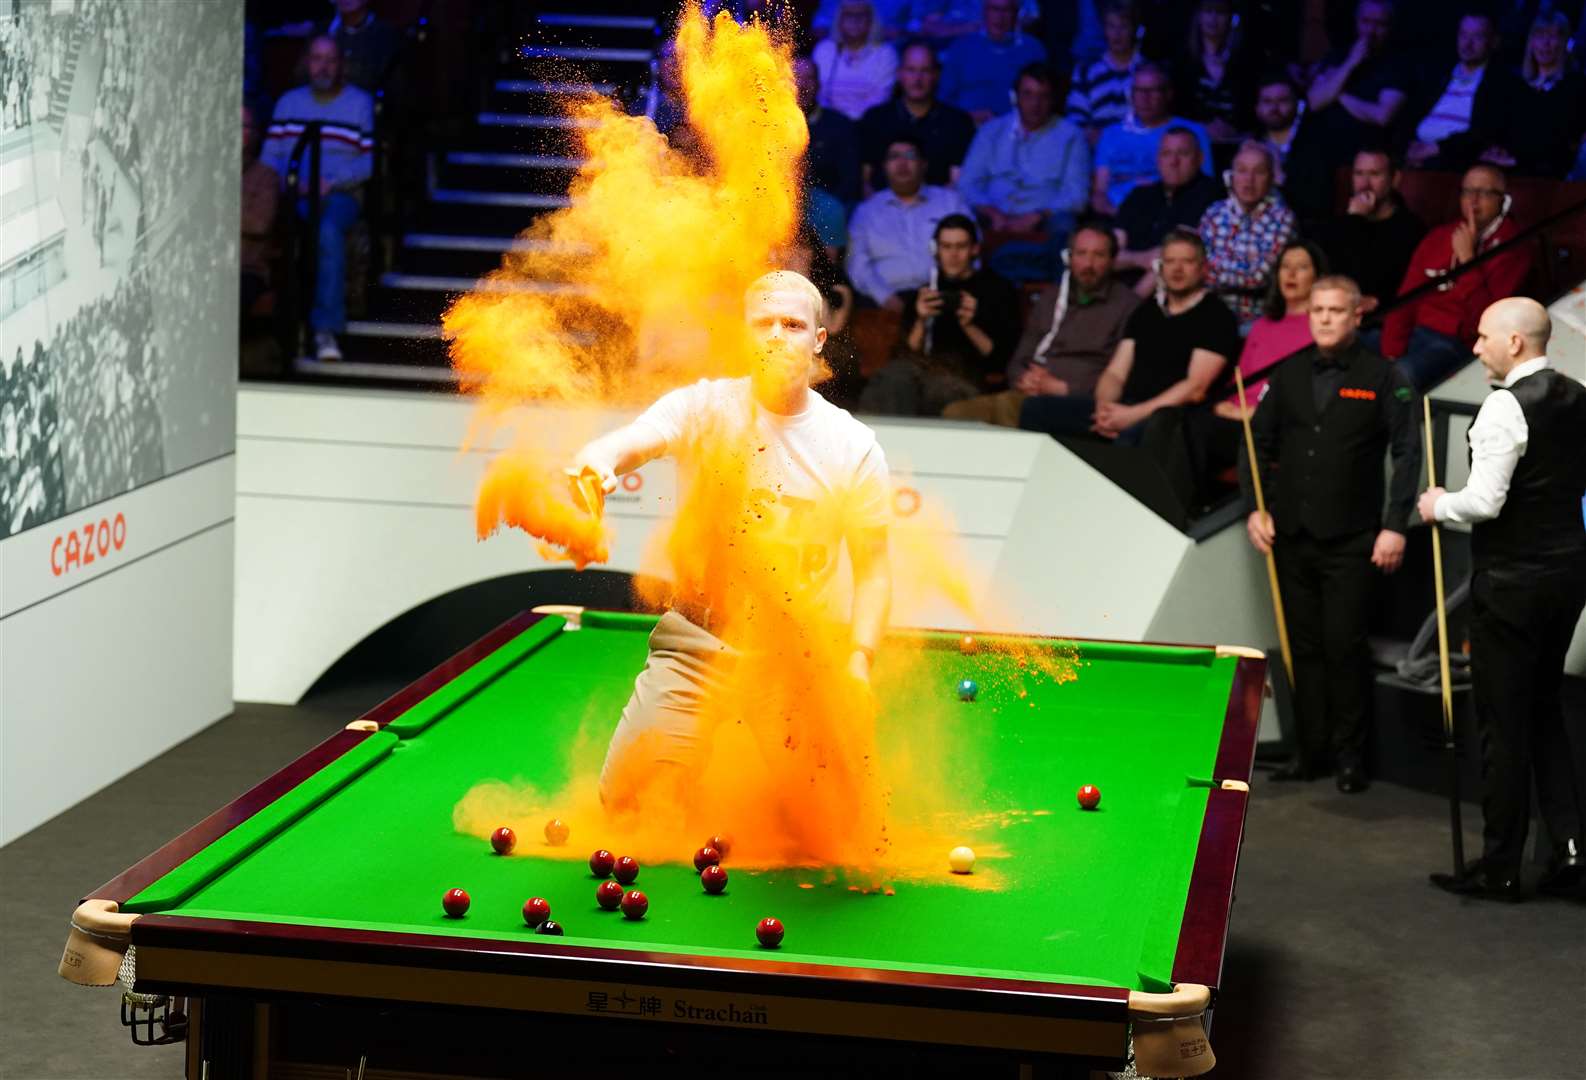 A Just Stop Oil protester also stopped play at the World Snooker Championship in April (Mike Egerton/PA)